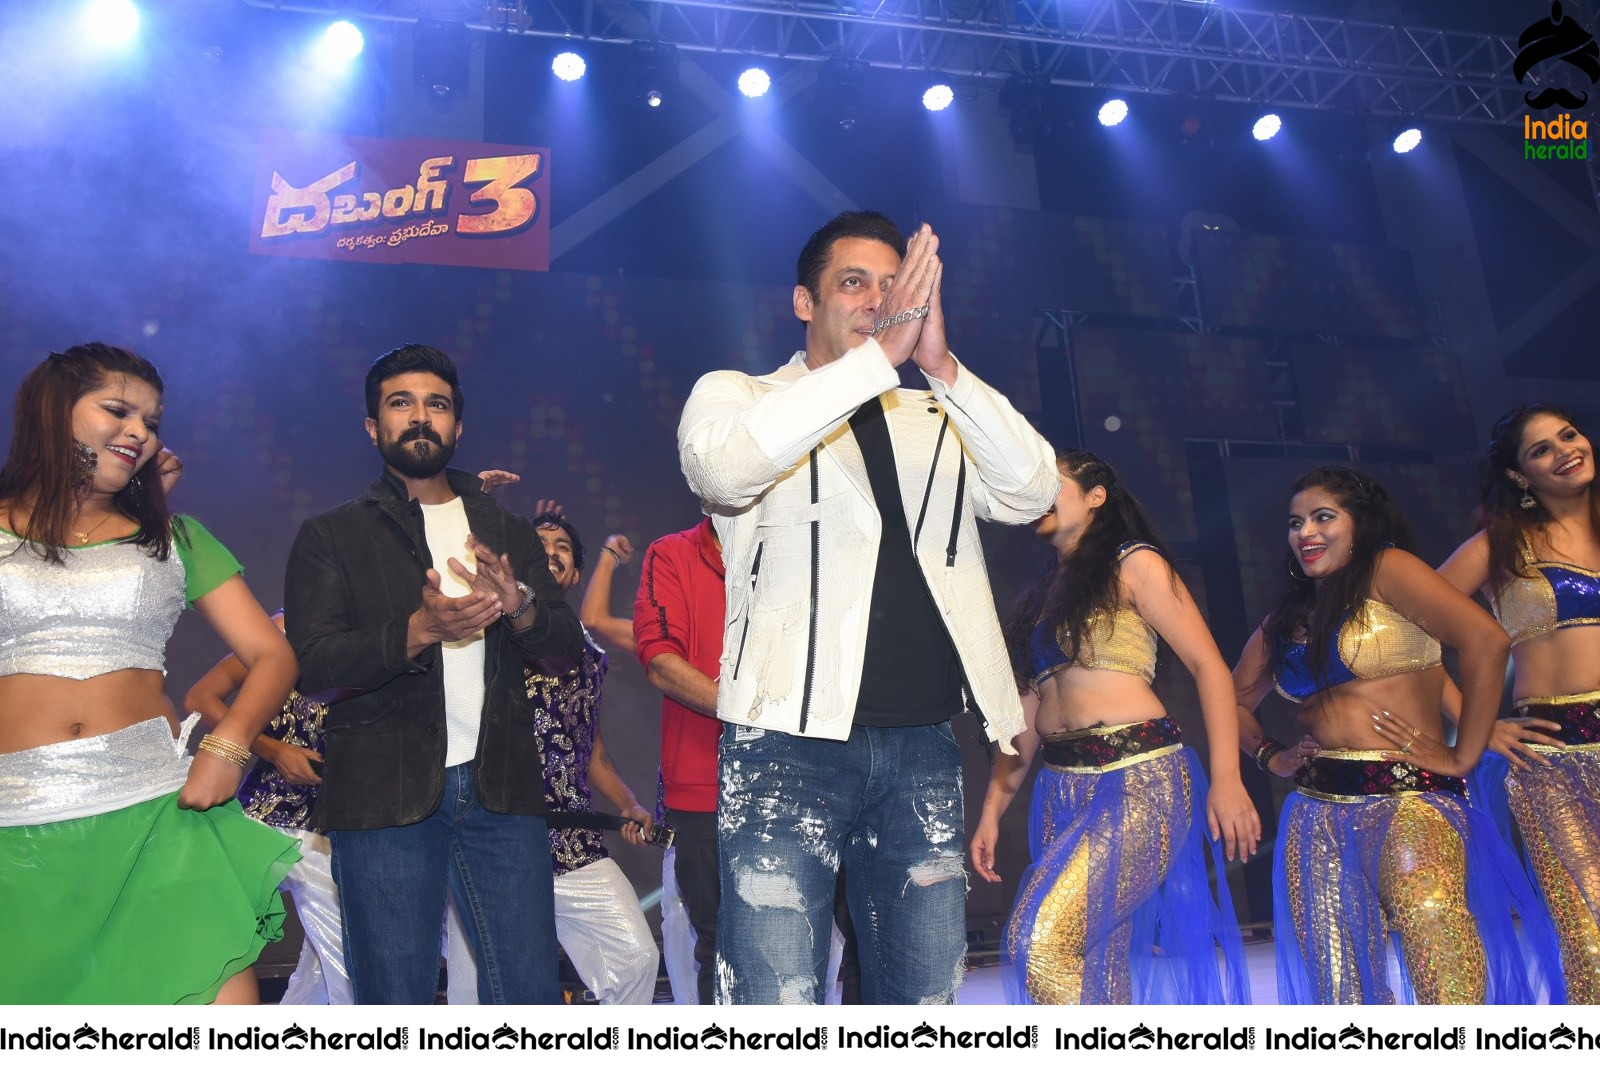 When Salman danced along with Tollywood Top Stars at Dabangg Event Set 2